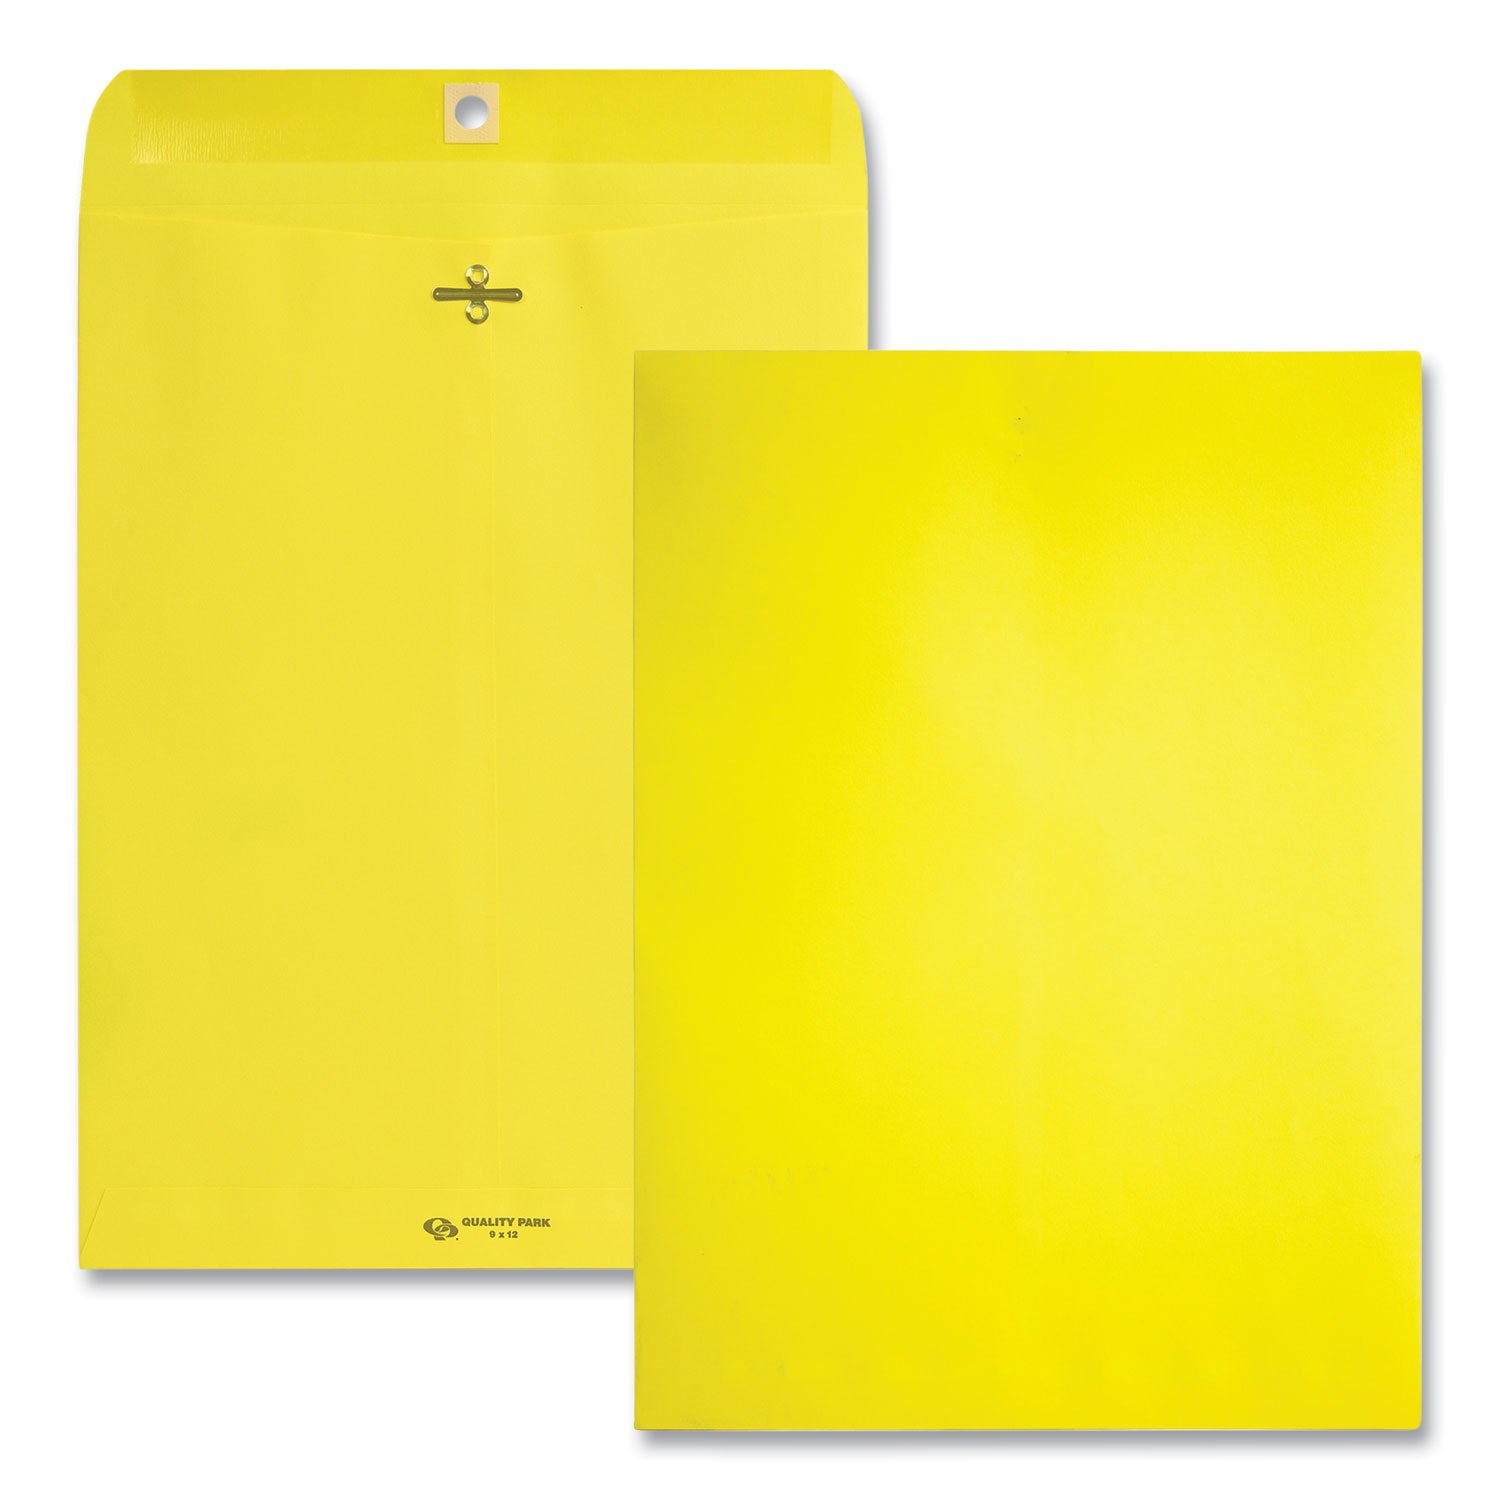 Clasp Envelope, 28 lb Bond Weight Paper, #90, Square Flap, Clasp/Gummed Closure, 9 x 12, Yellow, 10/Pack - 